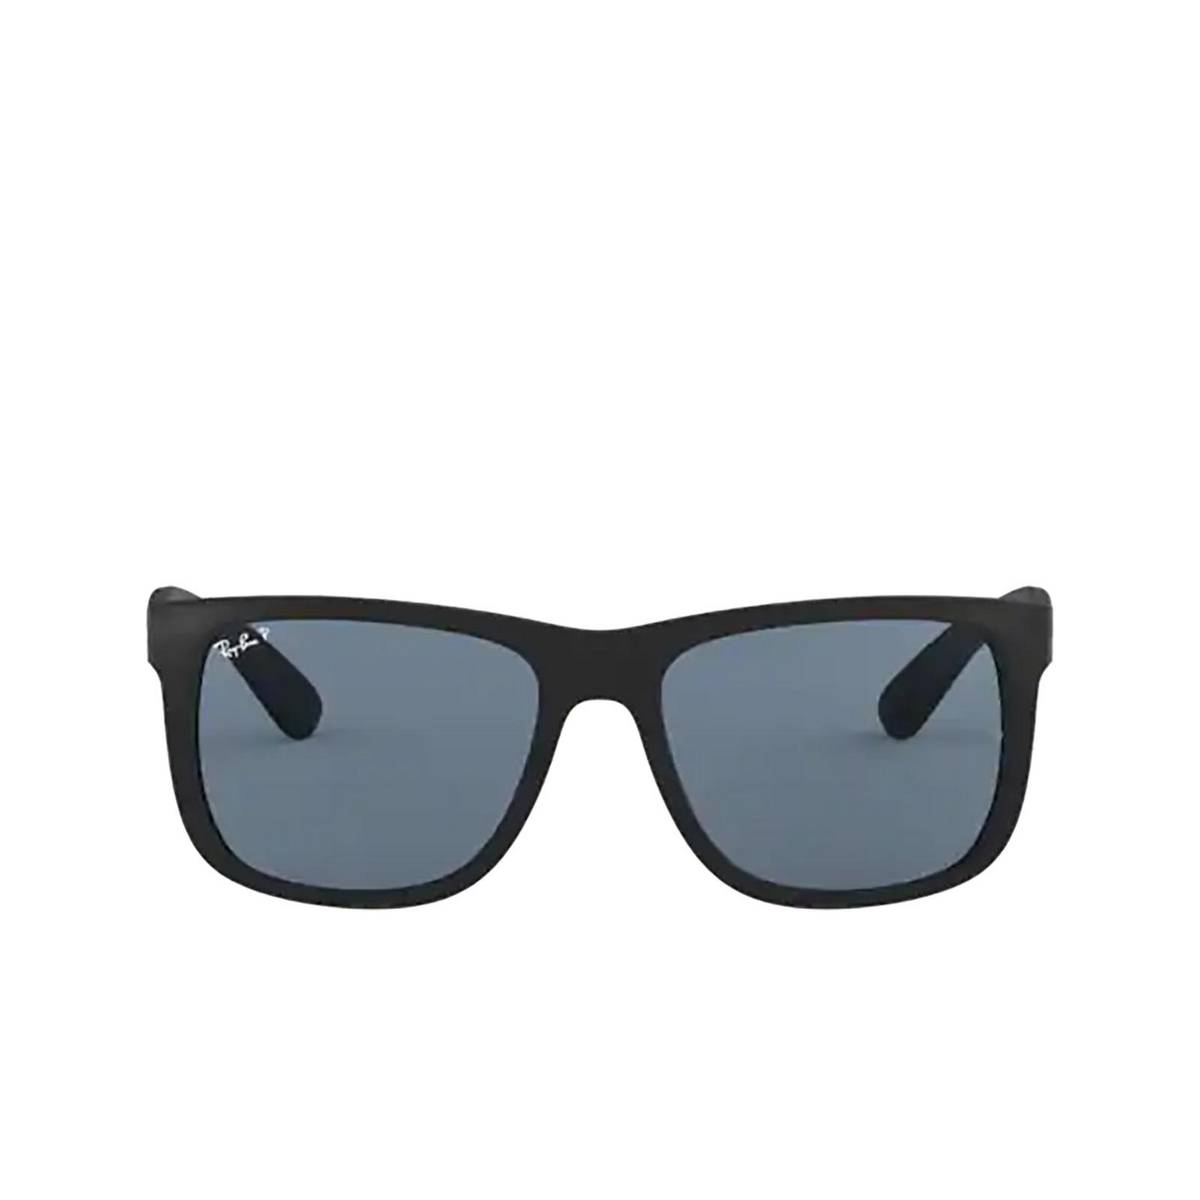 Ray-Ban JUSTIN Sunglasses 622/2V Rubber Black - front view